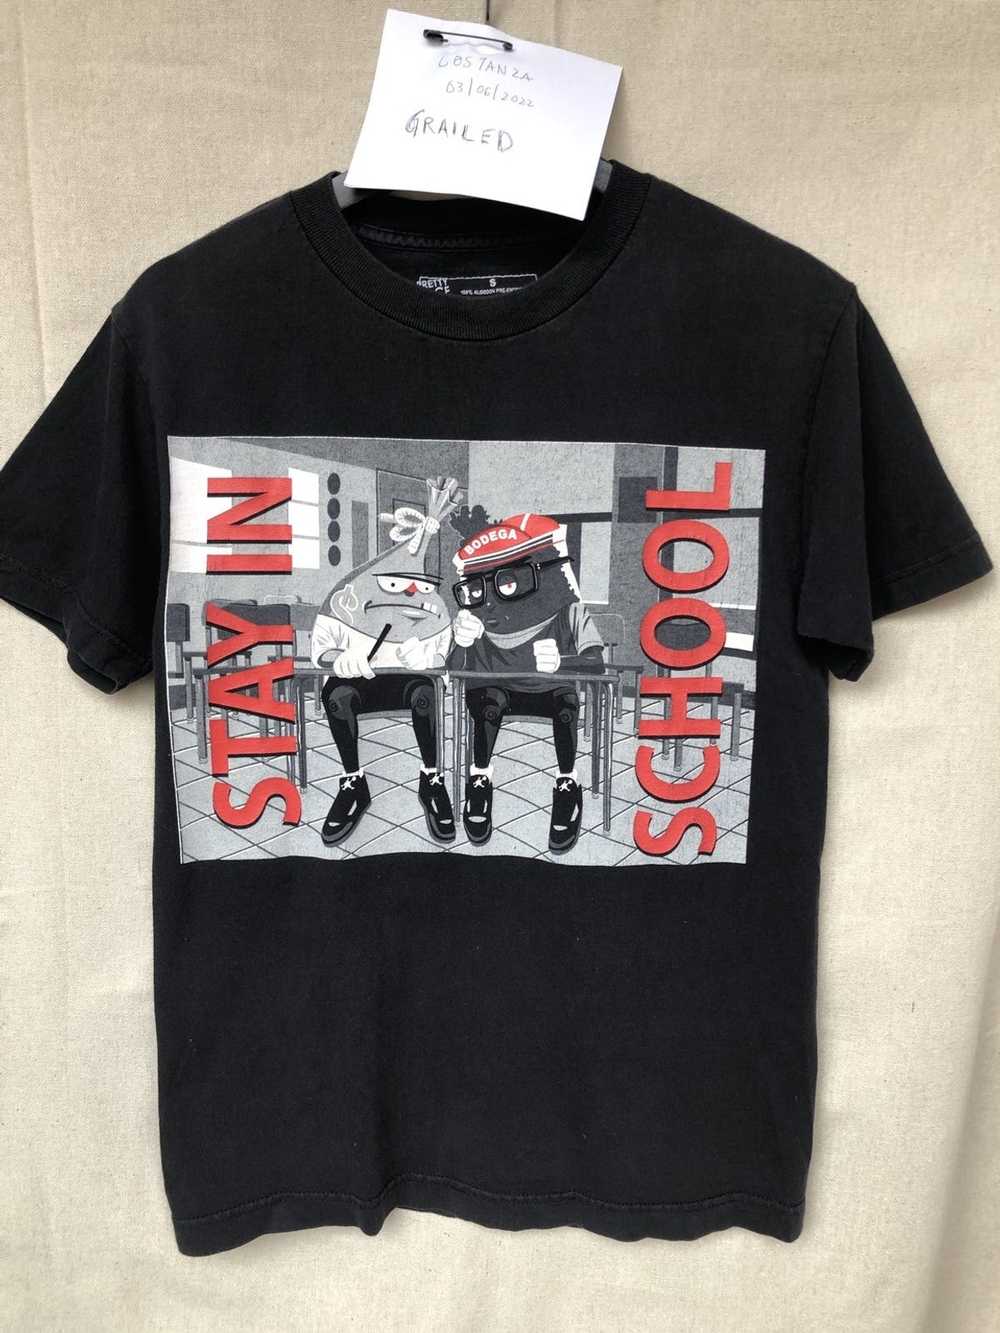 Bodega × Vintage “Stay in School” graphic tee - image 4